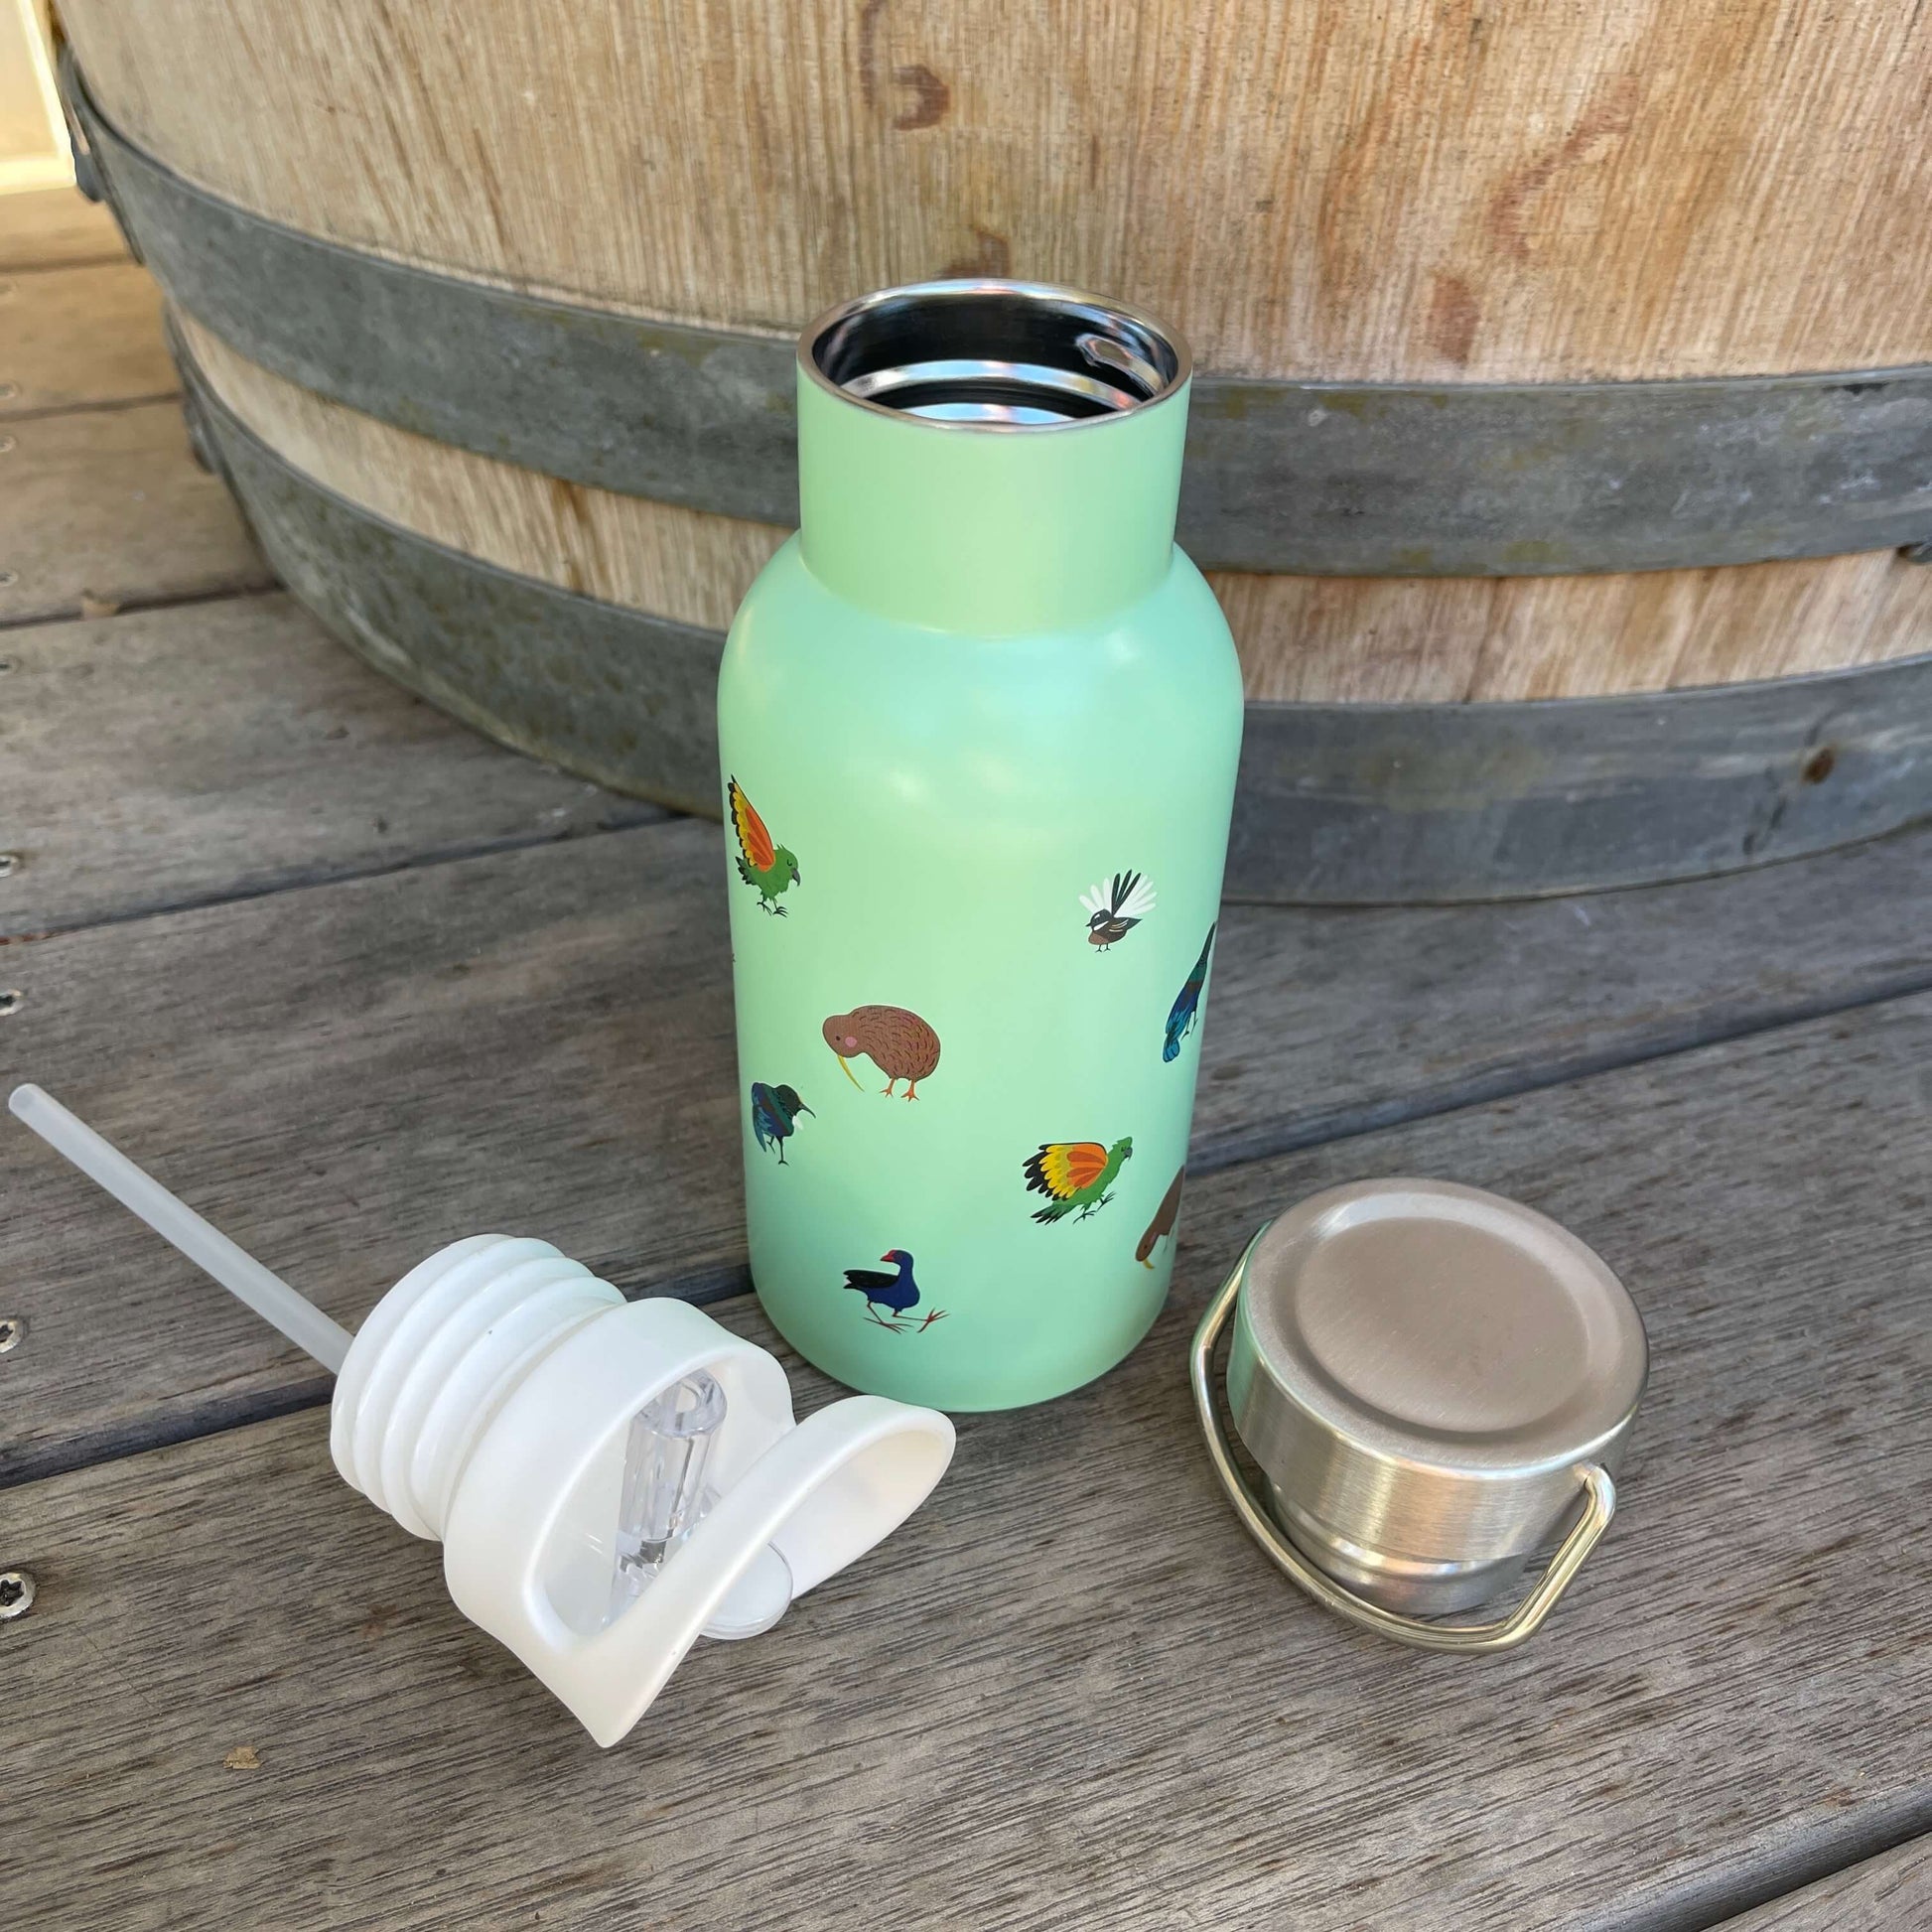 Small kids drink bottle with lid options removed and sitting next to it in mint green with New Zealand birds on it.